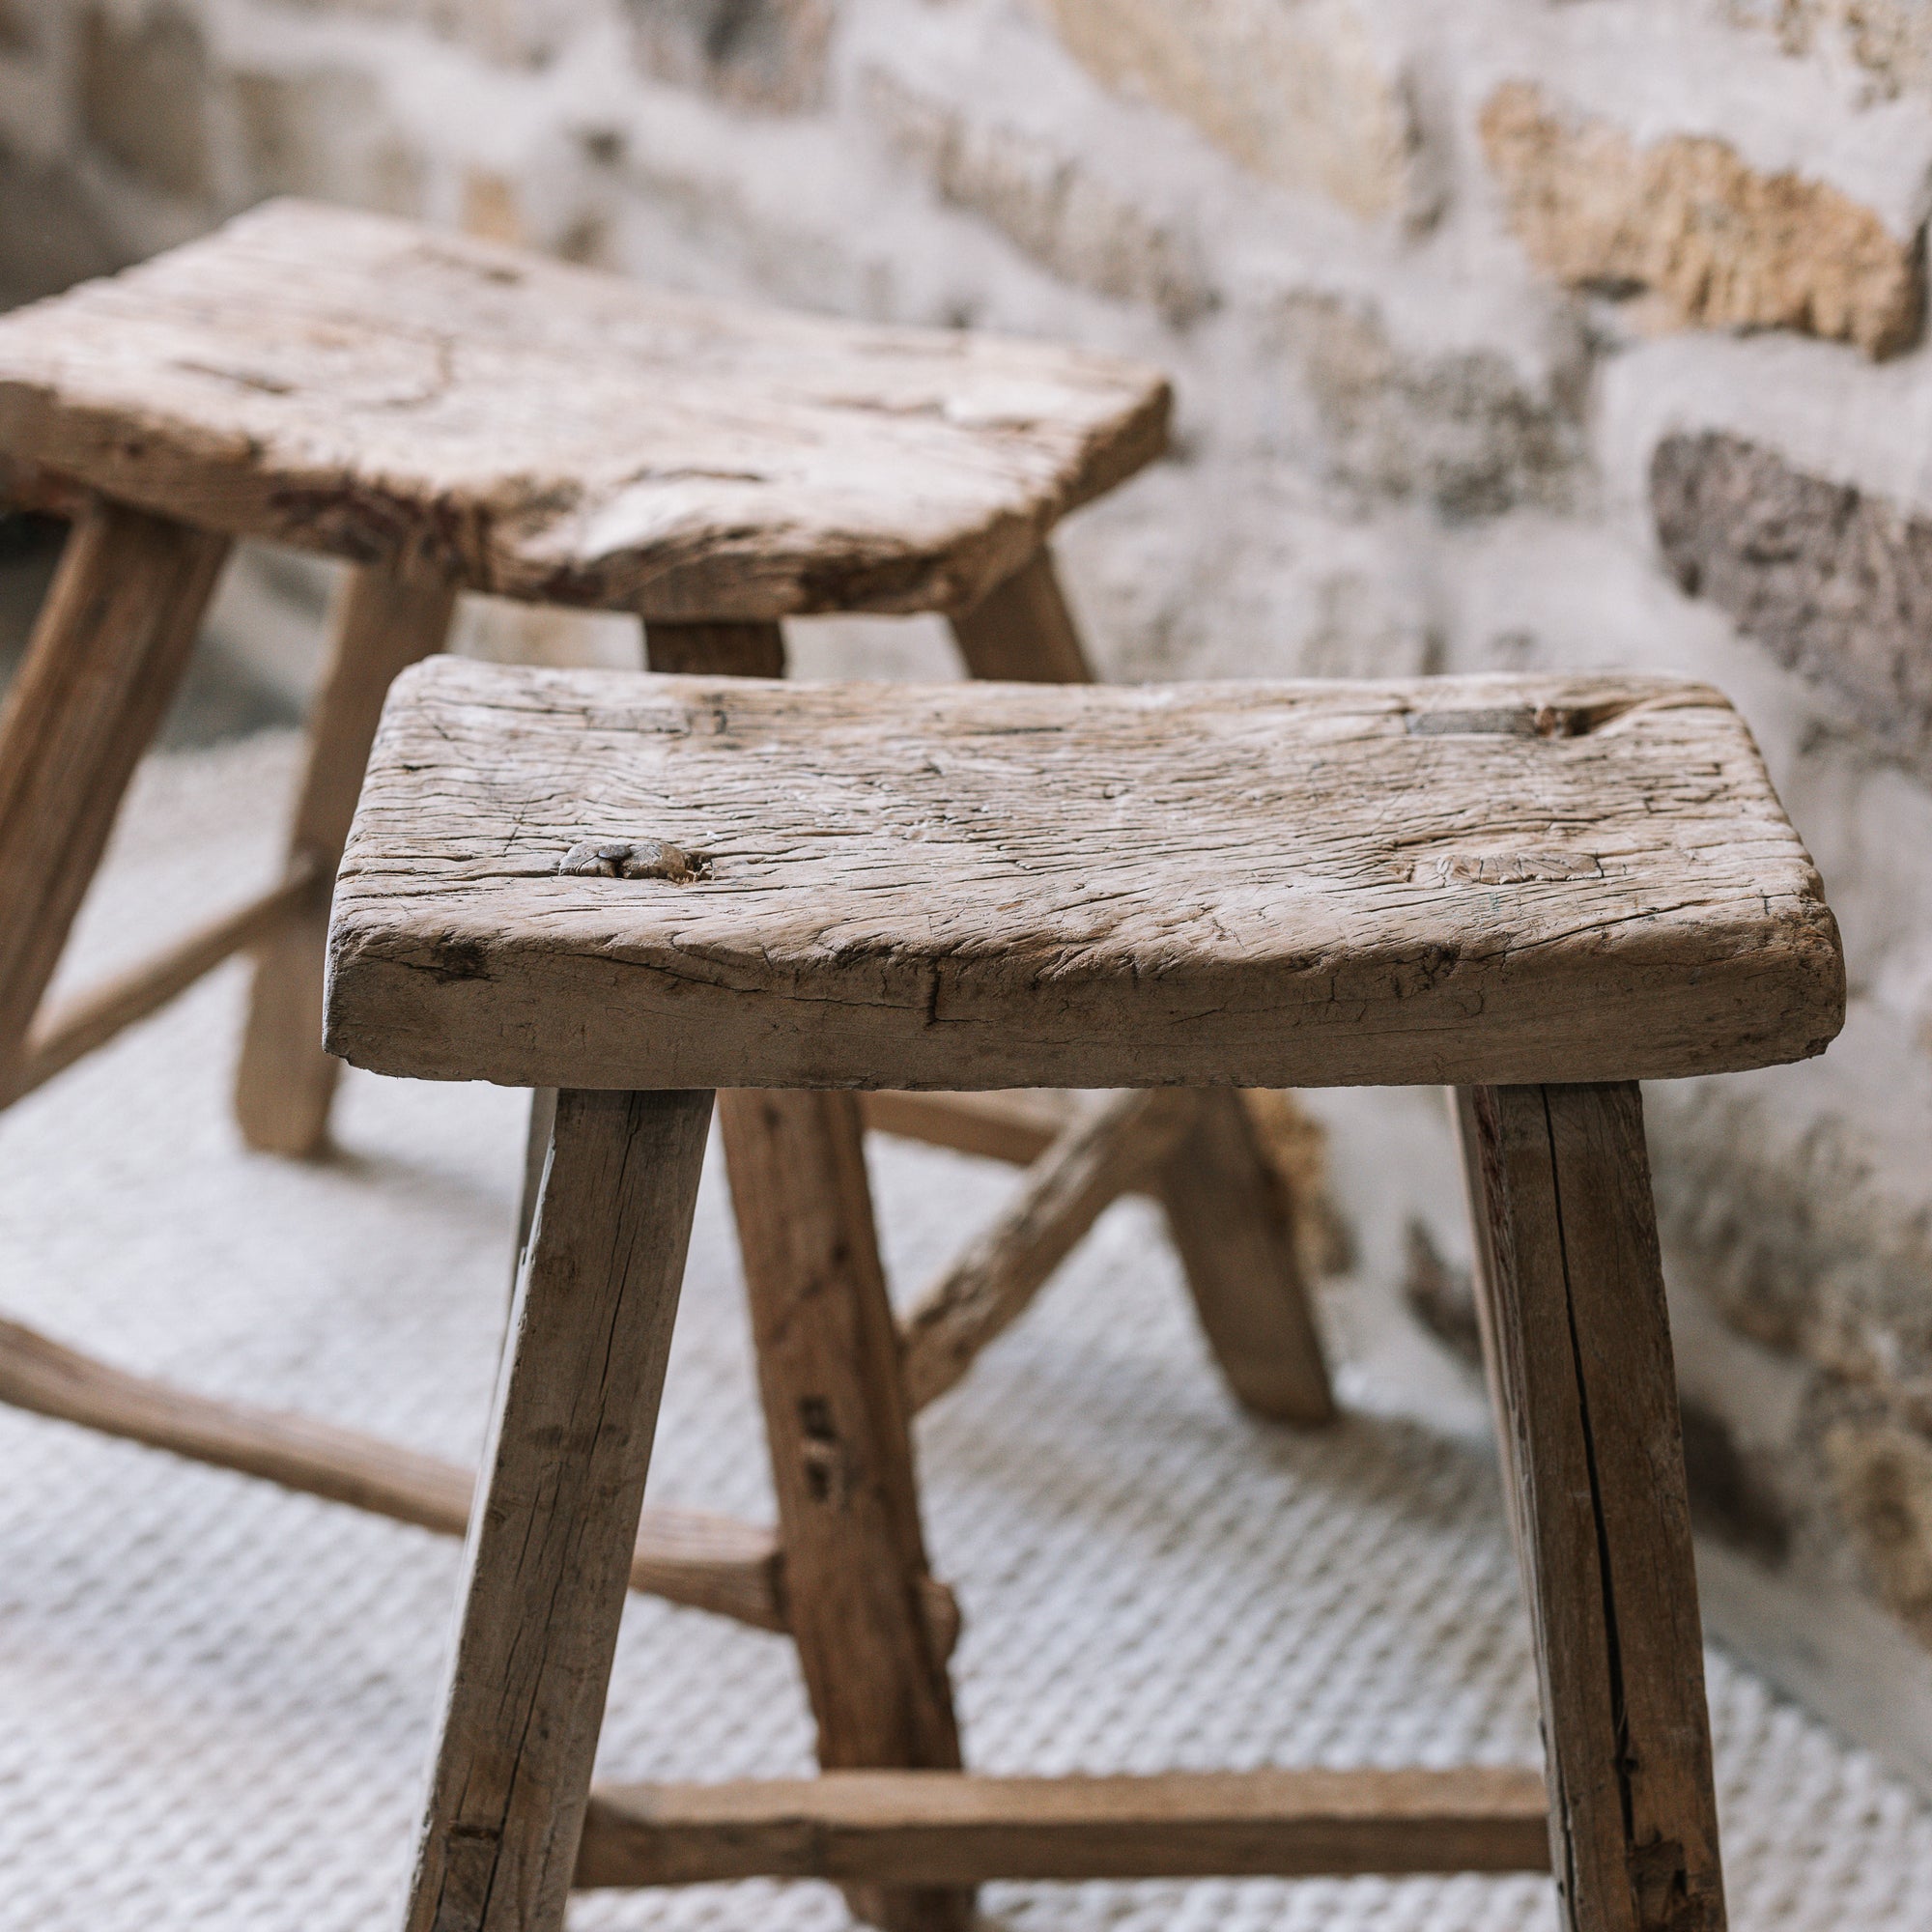 Reclaimed style wooden stools against a stone wall.